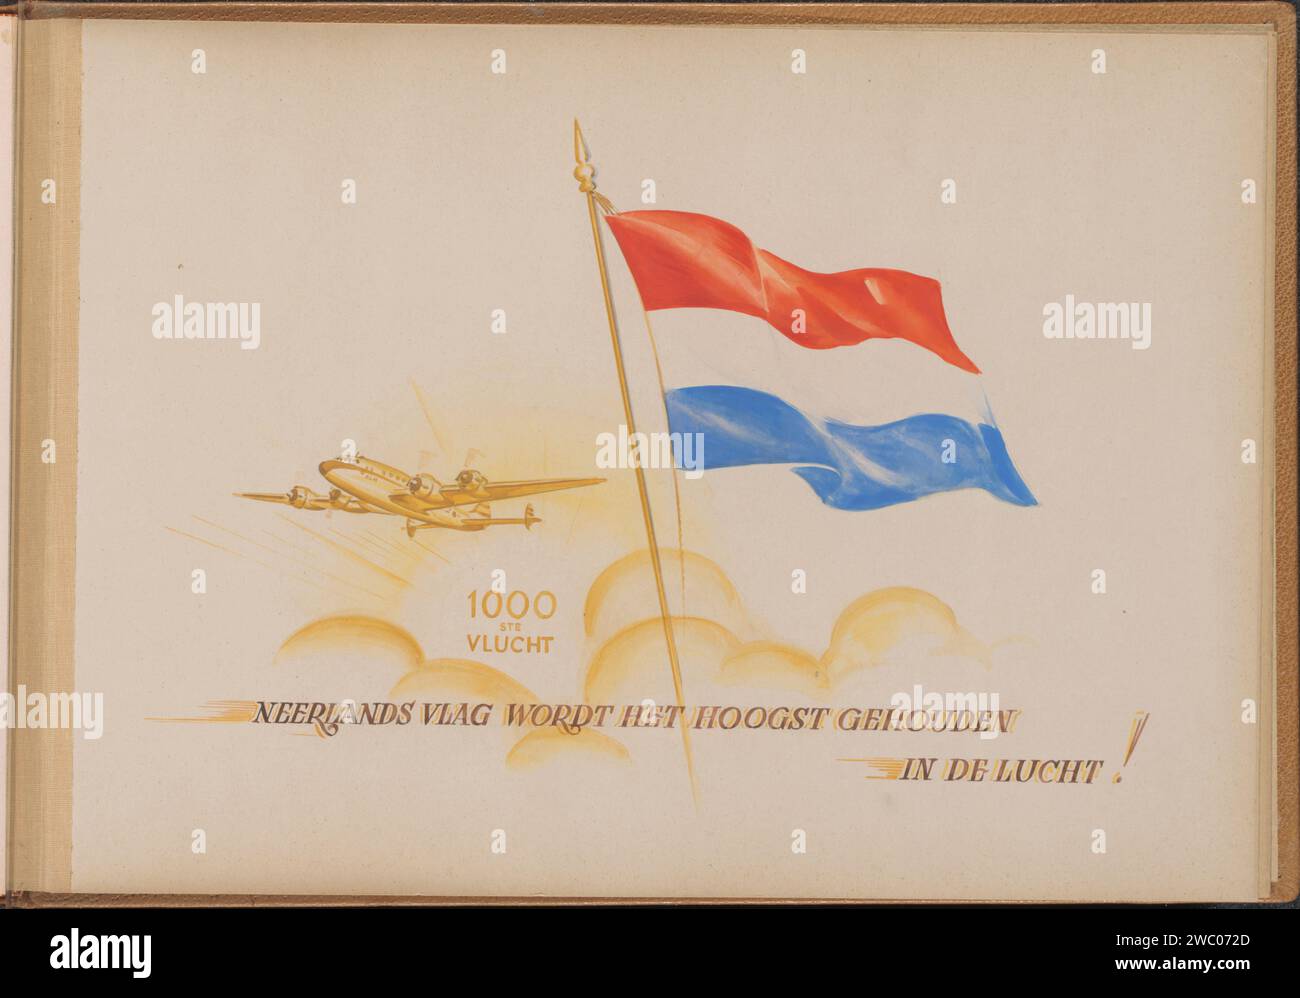 Dutch flag next to KLM device, c. 1949 drawing Album magazine with a drawing of a waving Dutch flag next to a KLM device above sun-drenched clouds. Below that the text '1000th flight' and 'Neerlands flag is kept the highest in the air!'. Part of the memorial album of the Indies line of KLM, part II.  paper. watercolor (paint). cardboard brush airborne traffic, aviation. travelling; tourism Stock Photo